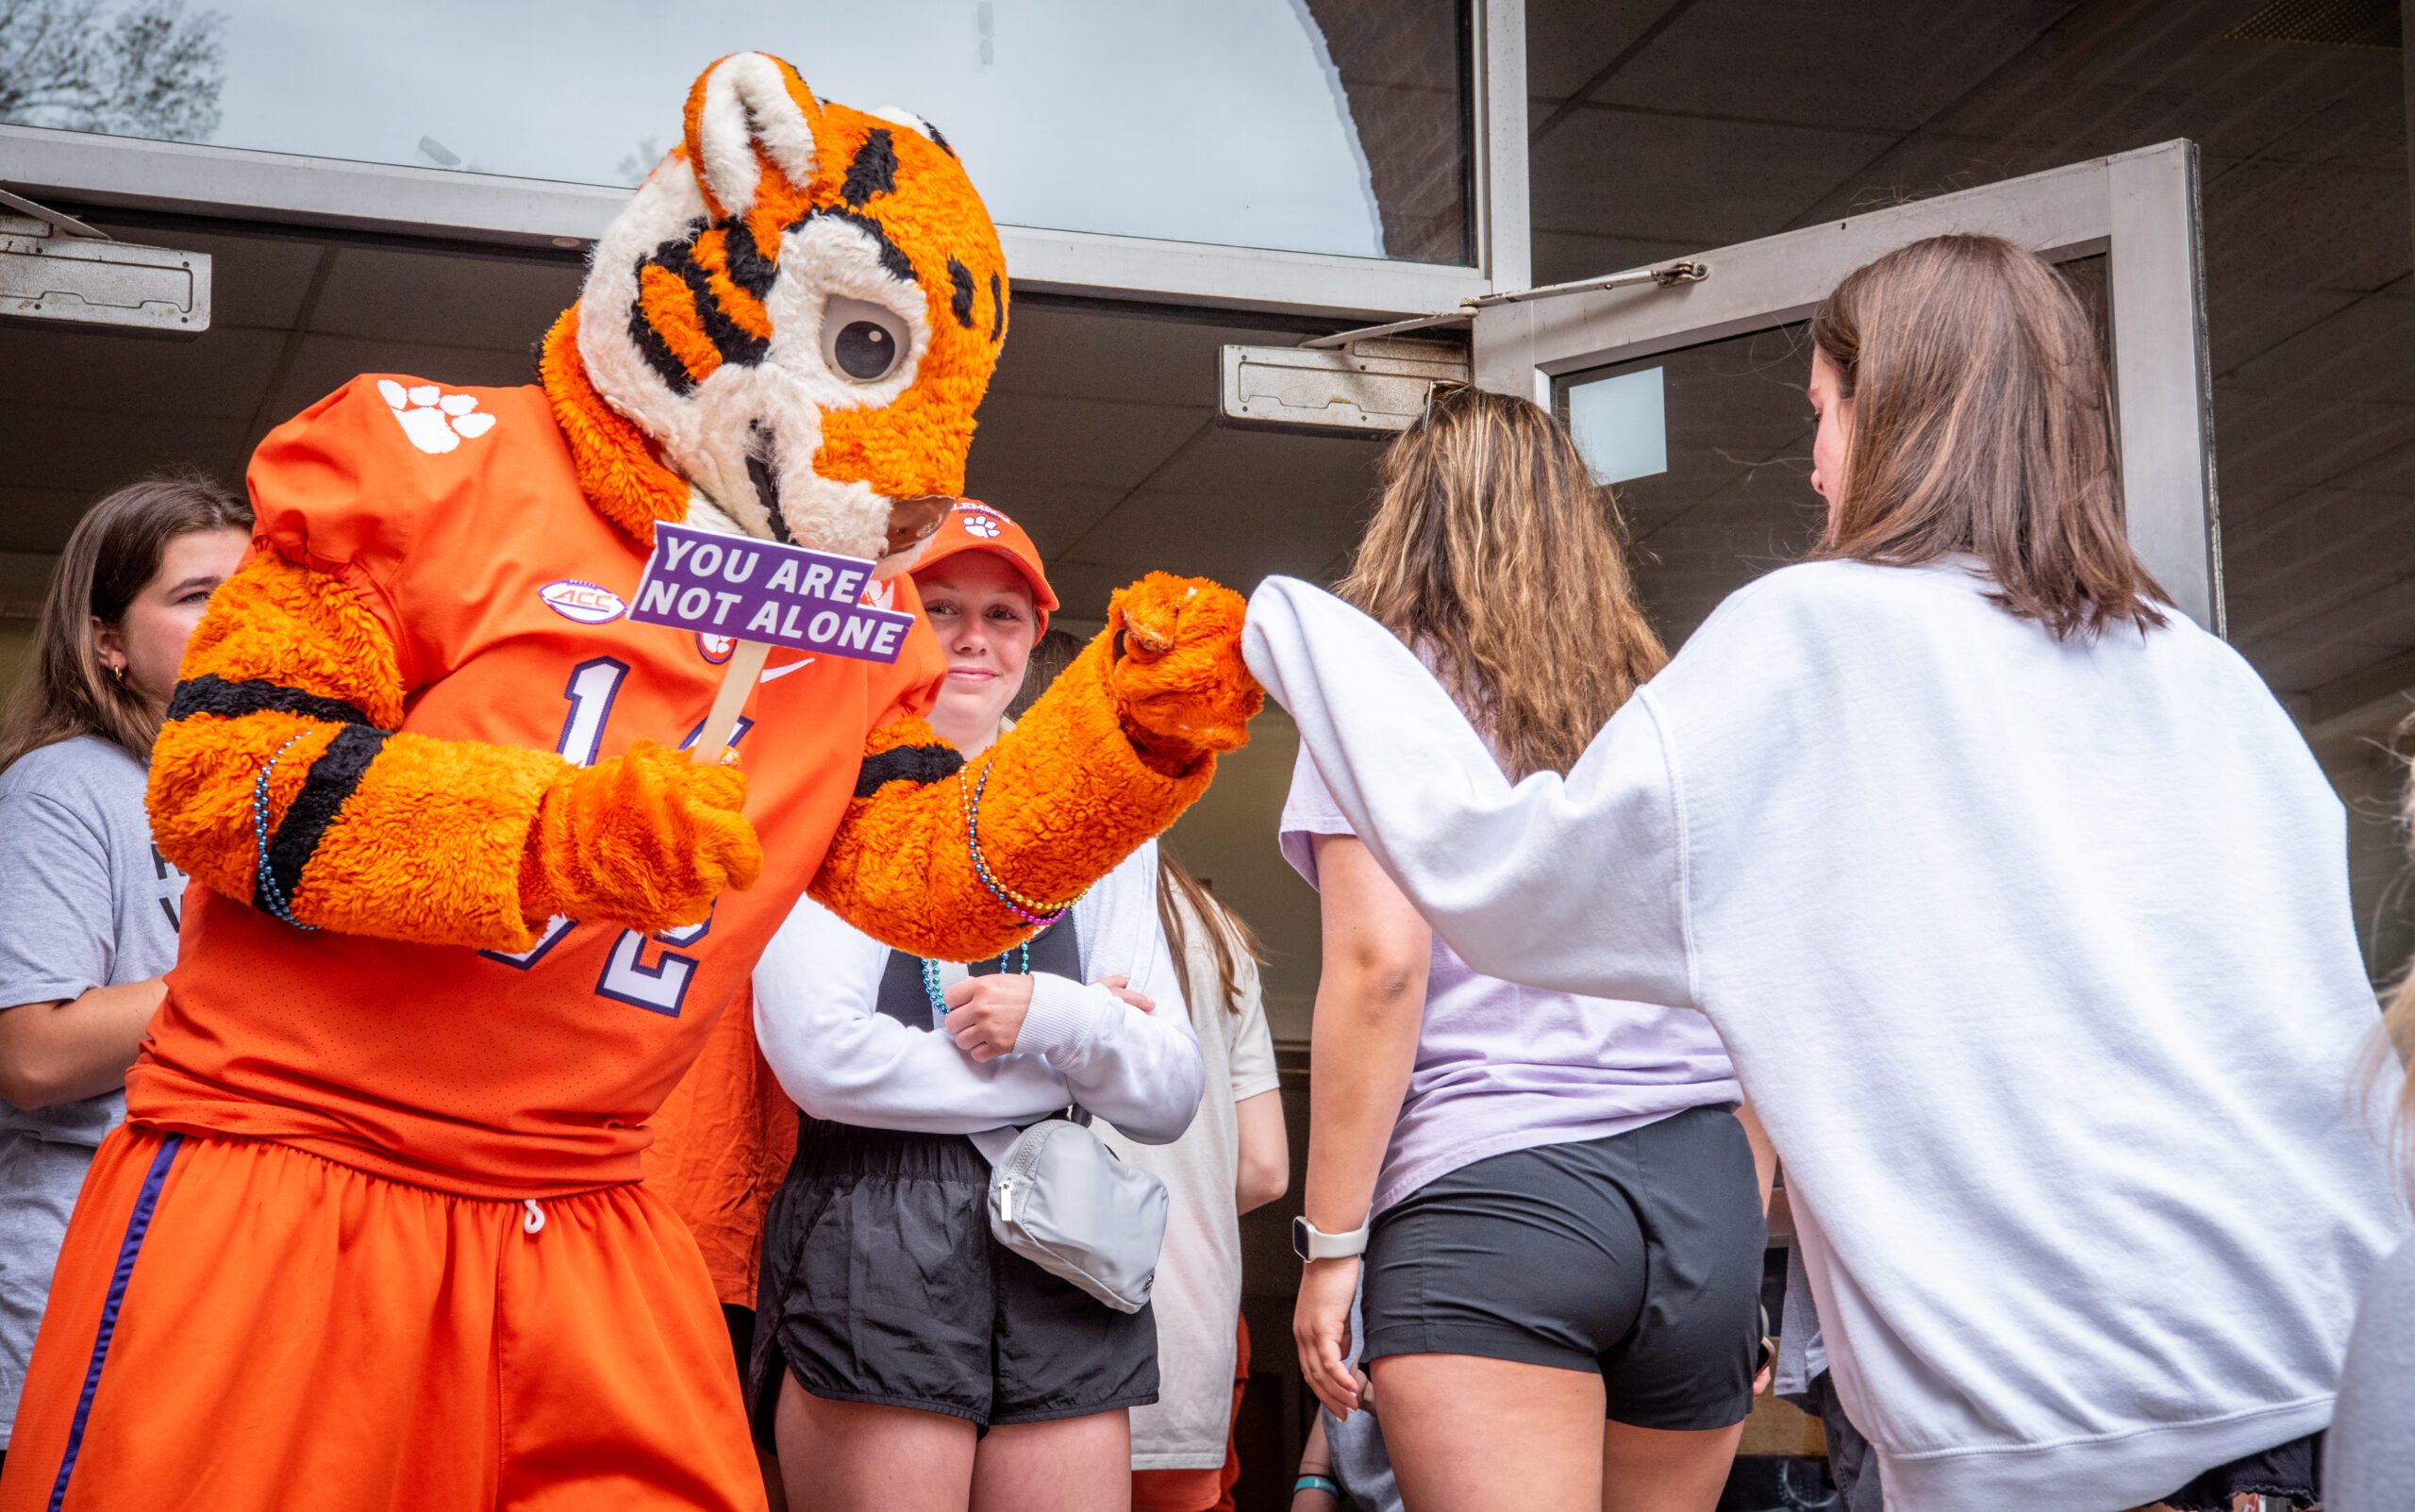 The Clemson Tiger fist-pumping with a student while holding a sign that says "You Are Not Alone"